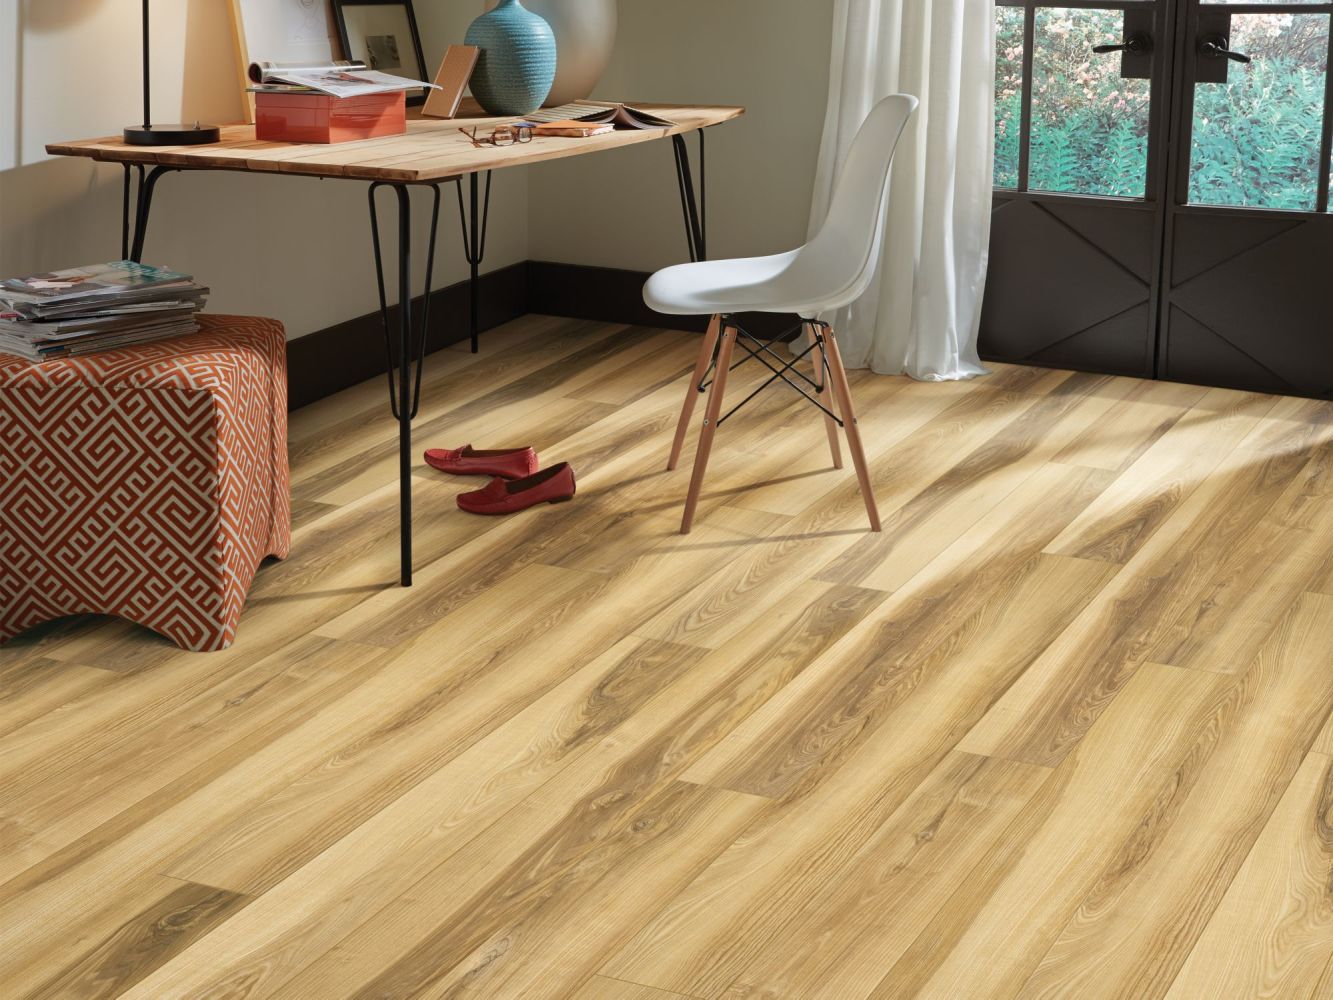 Shaw Floors Resilient Property Solutions Resolute XL HD Plus Butterscotch Walnut 00695_VE387